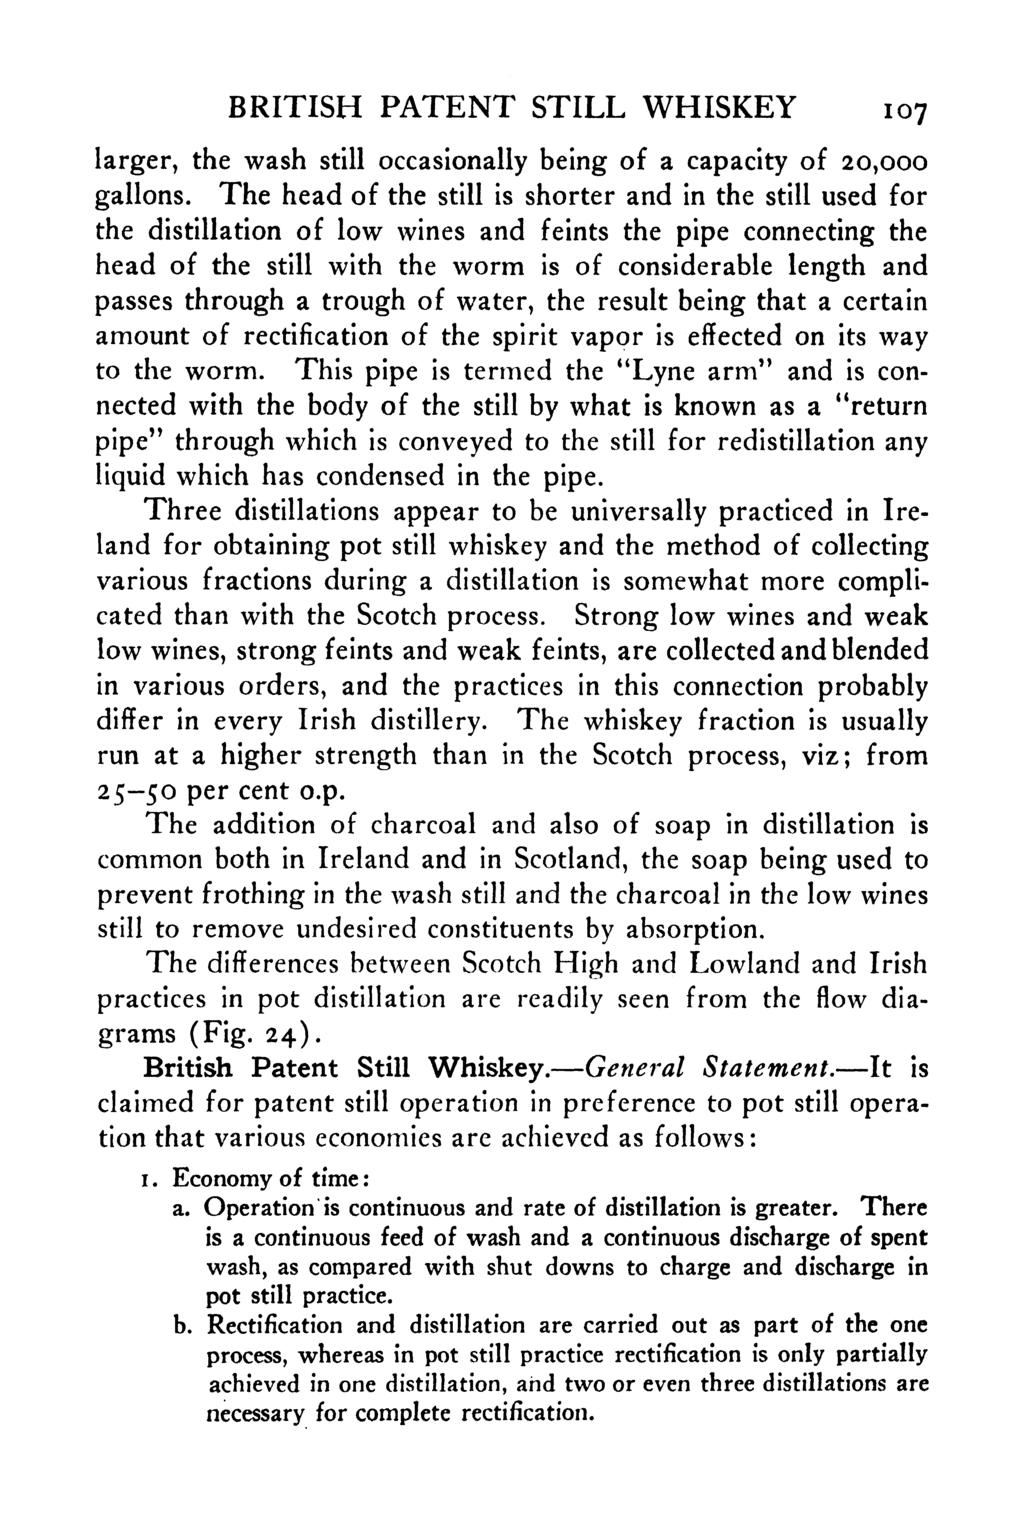 BRITISH PATENT STILL WHISKEY 107 larger, the wash still occasionally being of a capacity of 20,000 gallons.